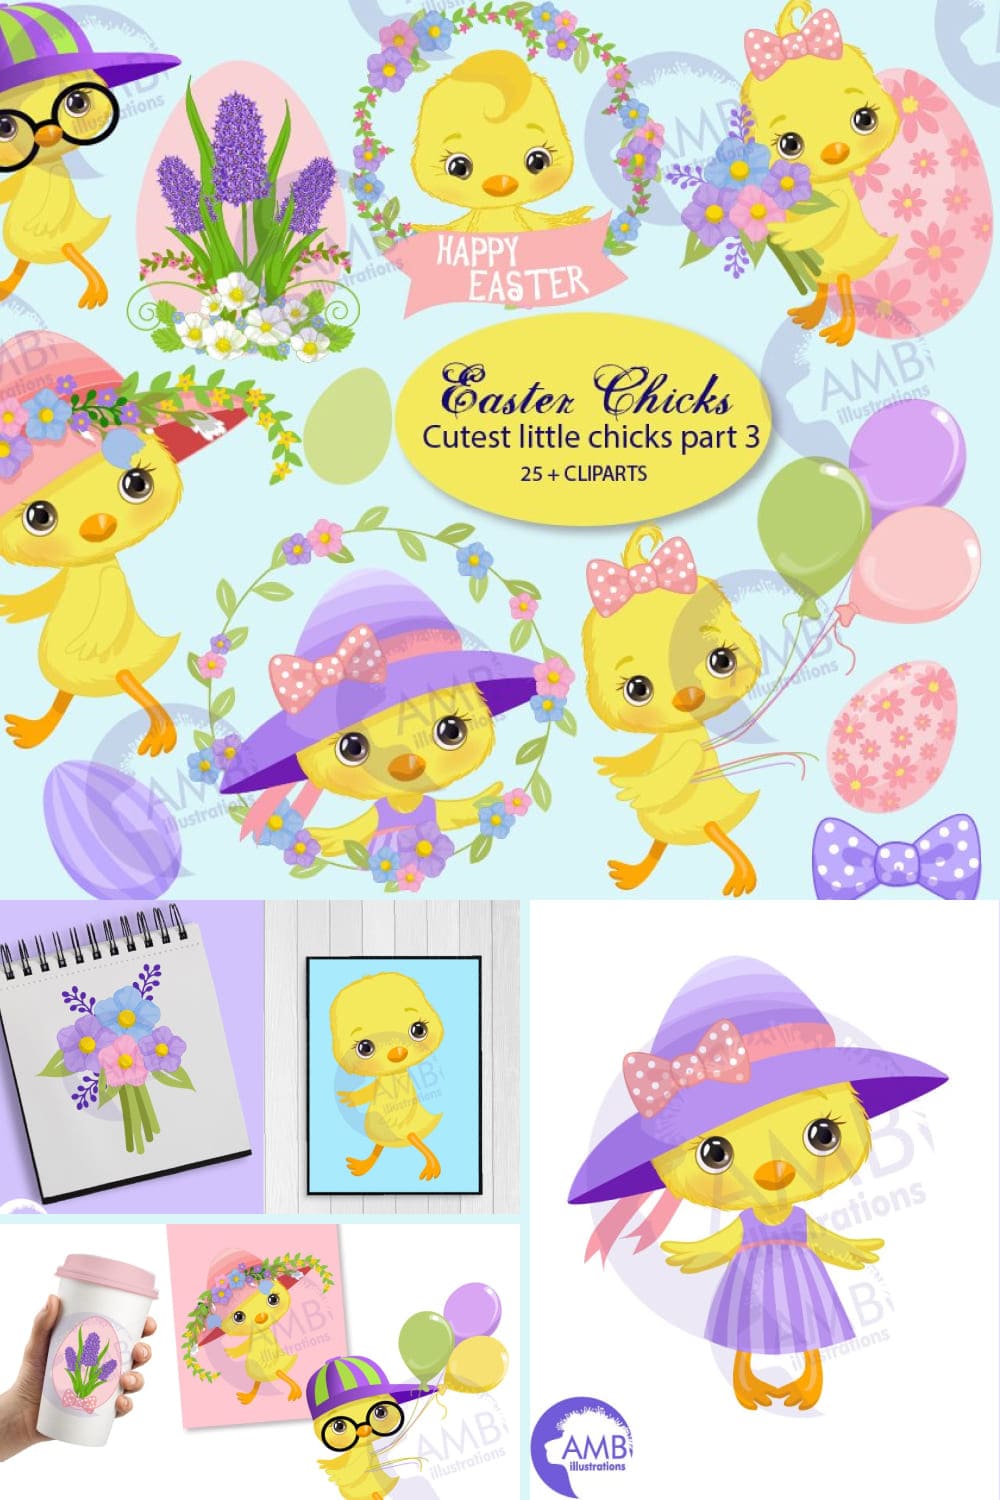 Examples of Easter designs with lavender flowers and chicks.